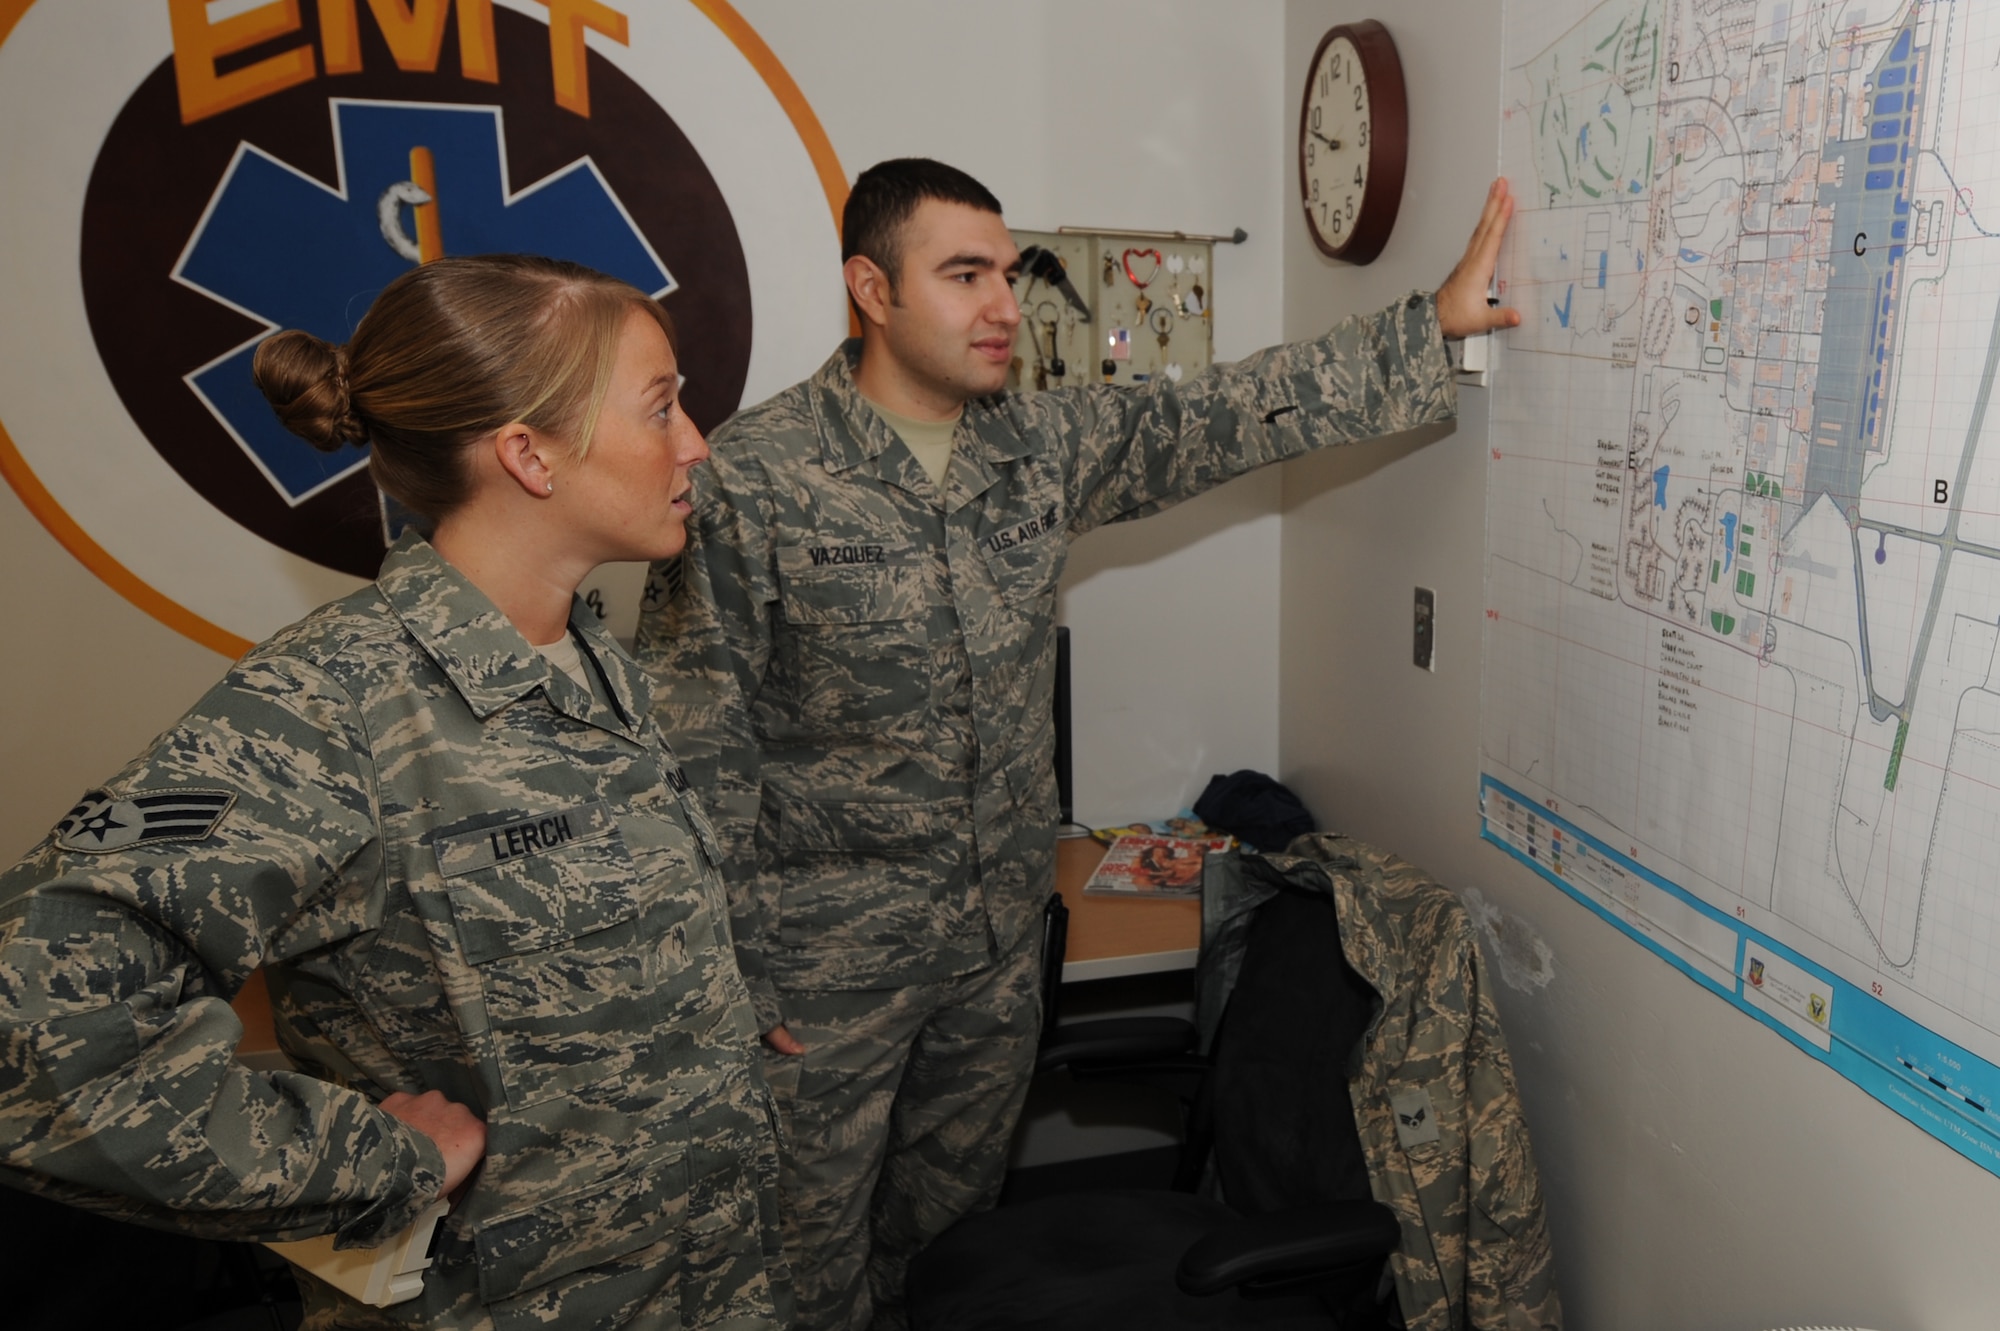 WHITEMAN AIR FORCE BASE, Mo. - Senior Airmen Melissa Lerch and Juan Vazquez, 509th Medical Operations Squadron aerospace medical technicians, review a base map to ensure they know the exact location of buildings on base to provide quick response, Feb. 23, 2010. The Ambulance Services flight operates on a 24 hours on, 48 hours off shift, supplying services to emergency calls as needed on and off-base. (U.S. Air Force photo/ Airman 1st Class Carlin Leslie)
